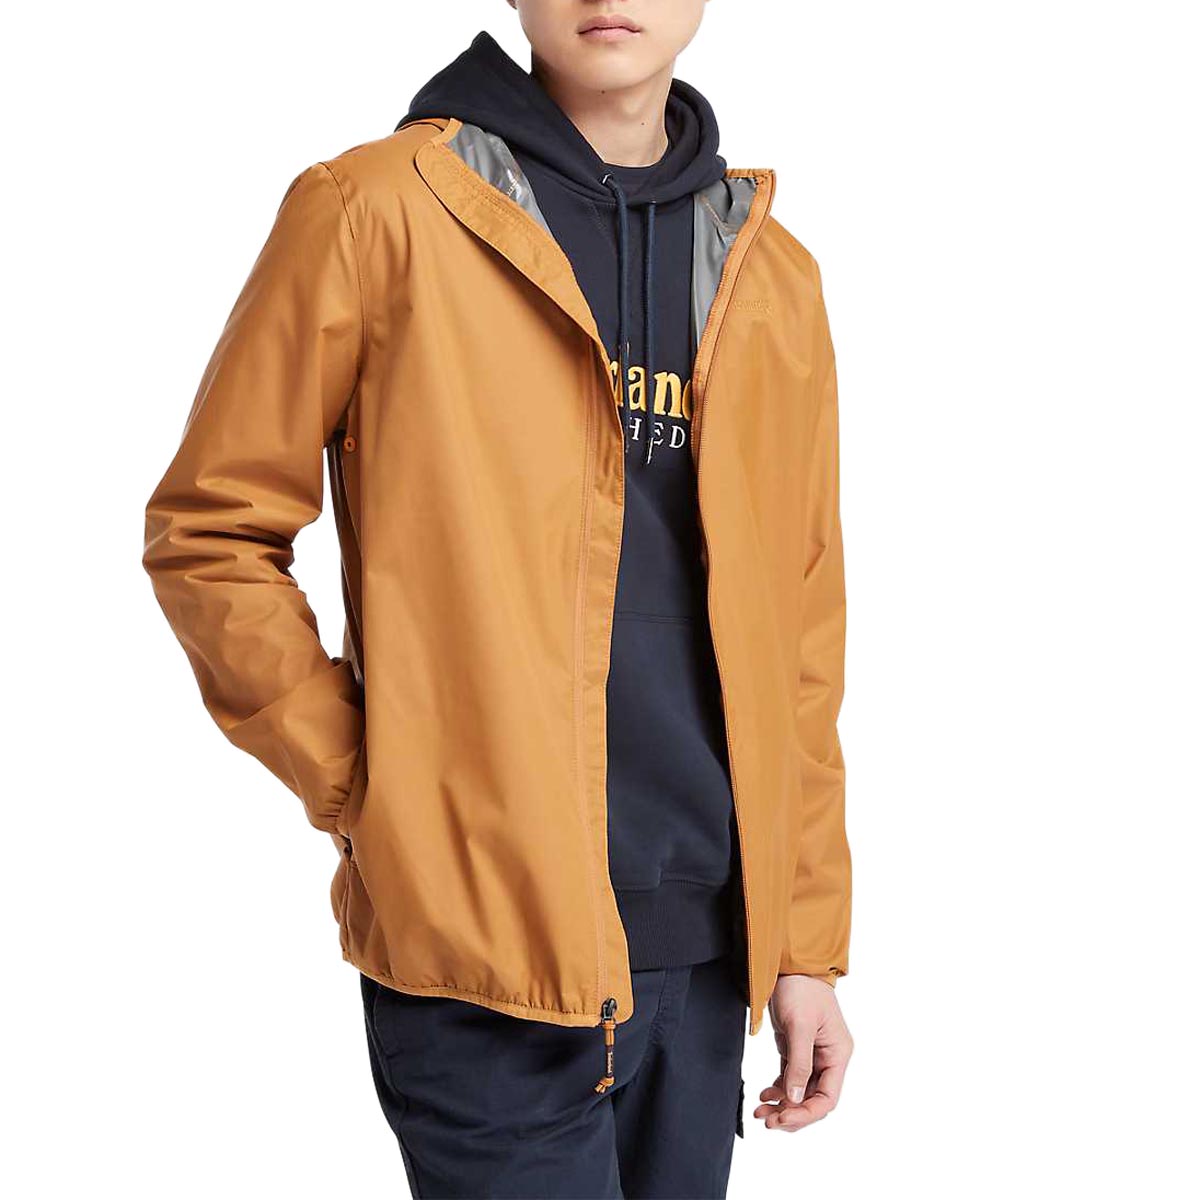 Timberland 2.5l Wind Resistant Jacket - Wheat image 3